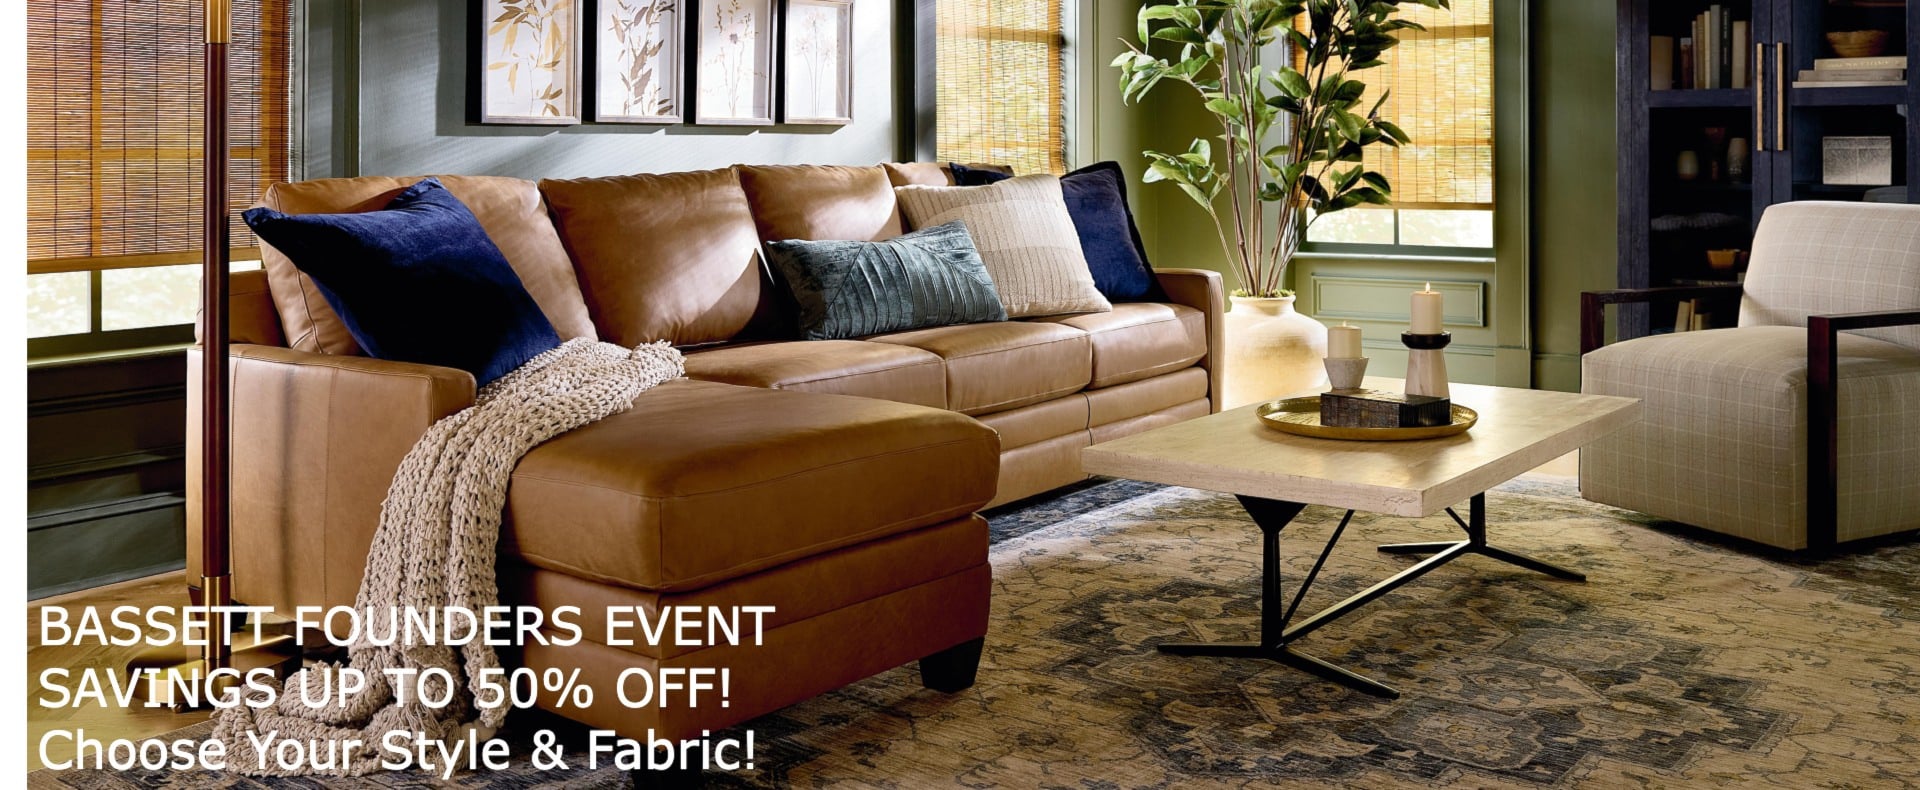 Bassett Founders event, up to 50% savings, custom options available